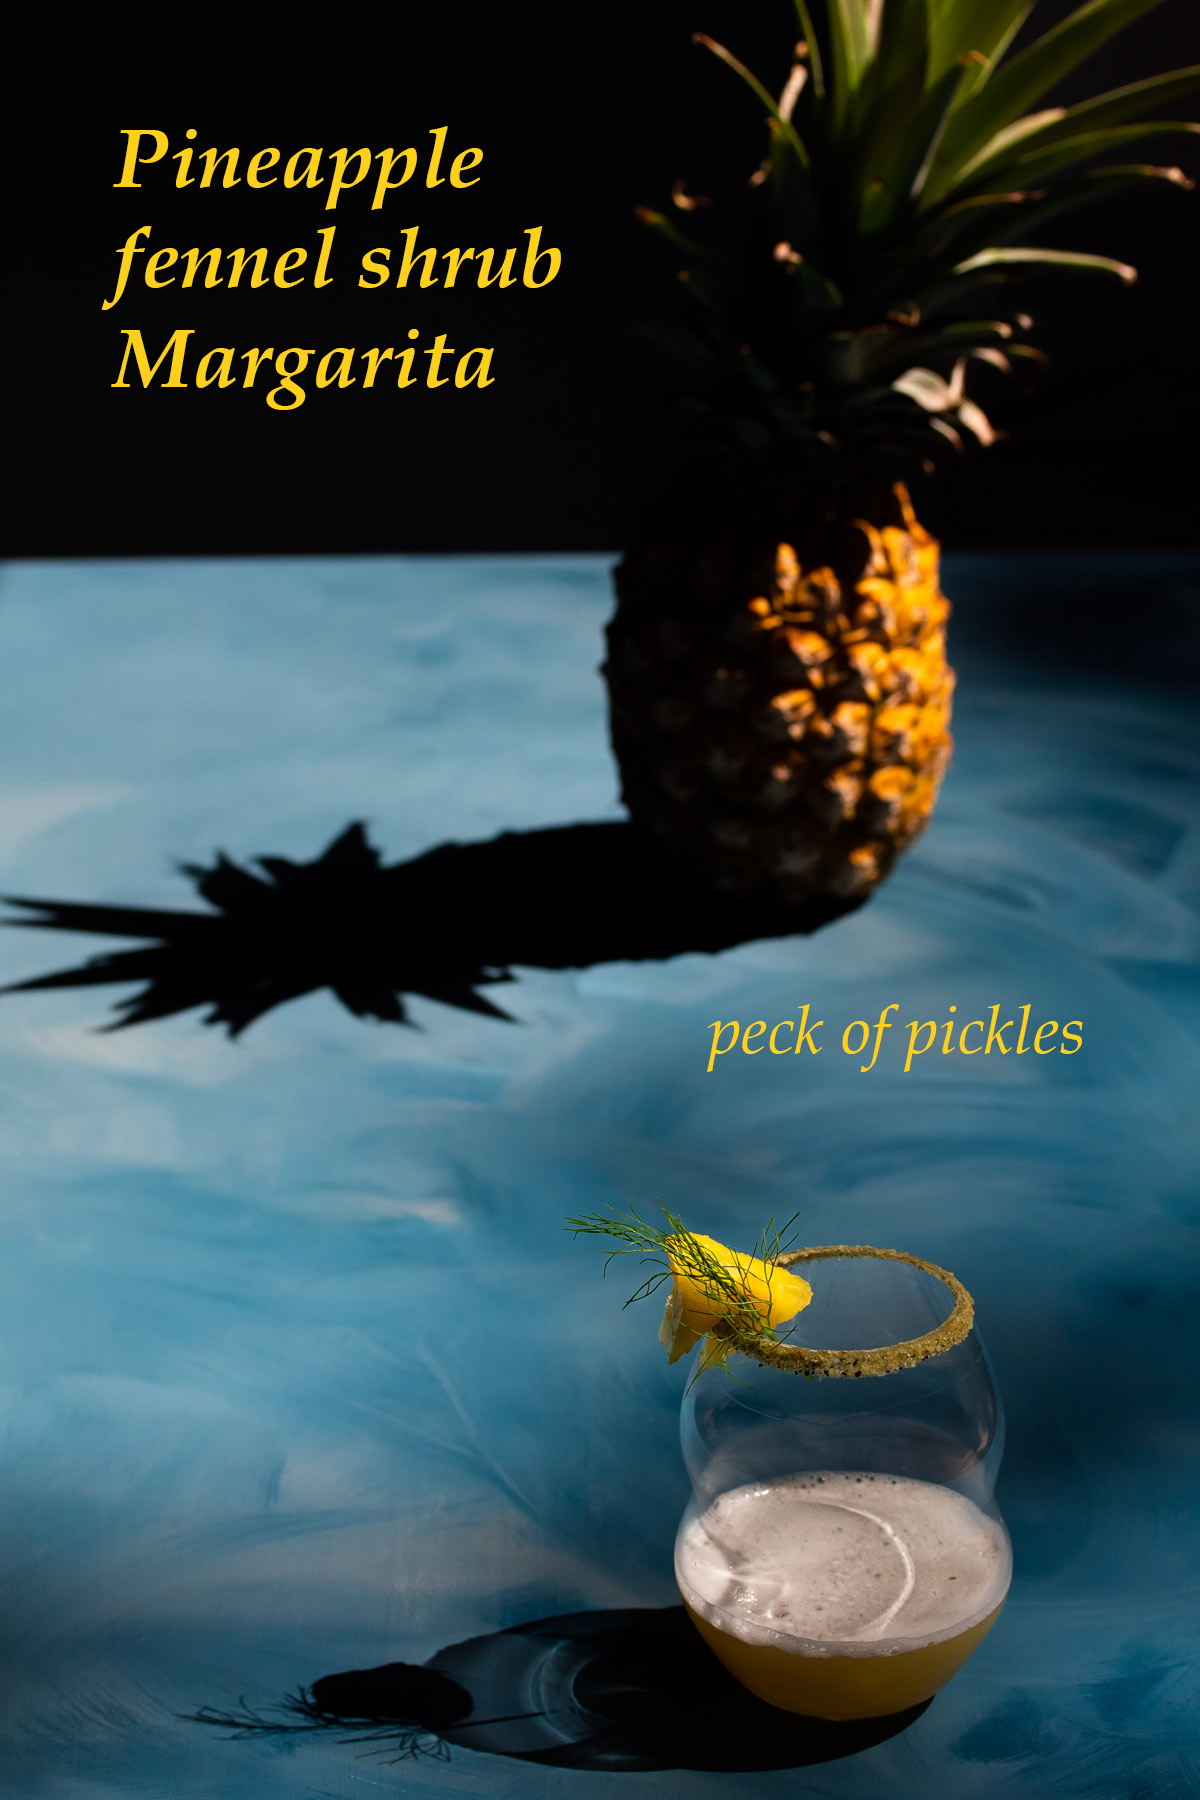 pineapple fennel shrub margarita cocktail with pineapple and shadow in background